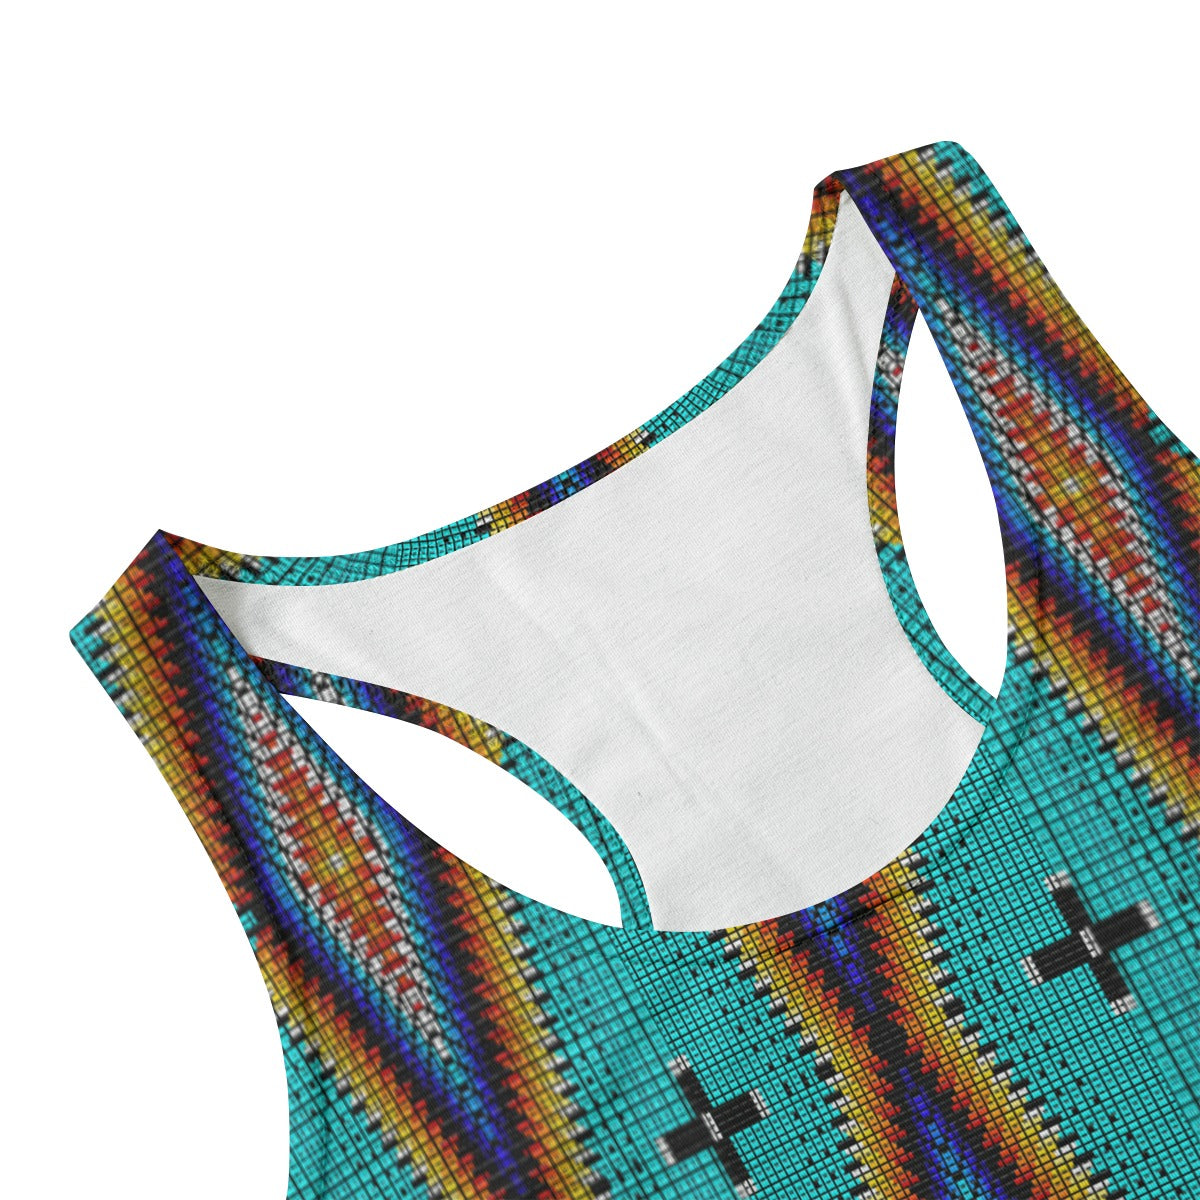 Diamond in the Bluff Turquoise Eco-friendly Women's Tank Top